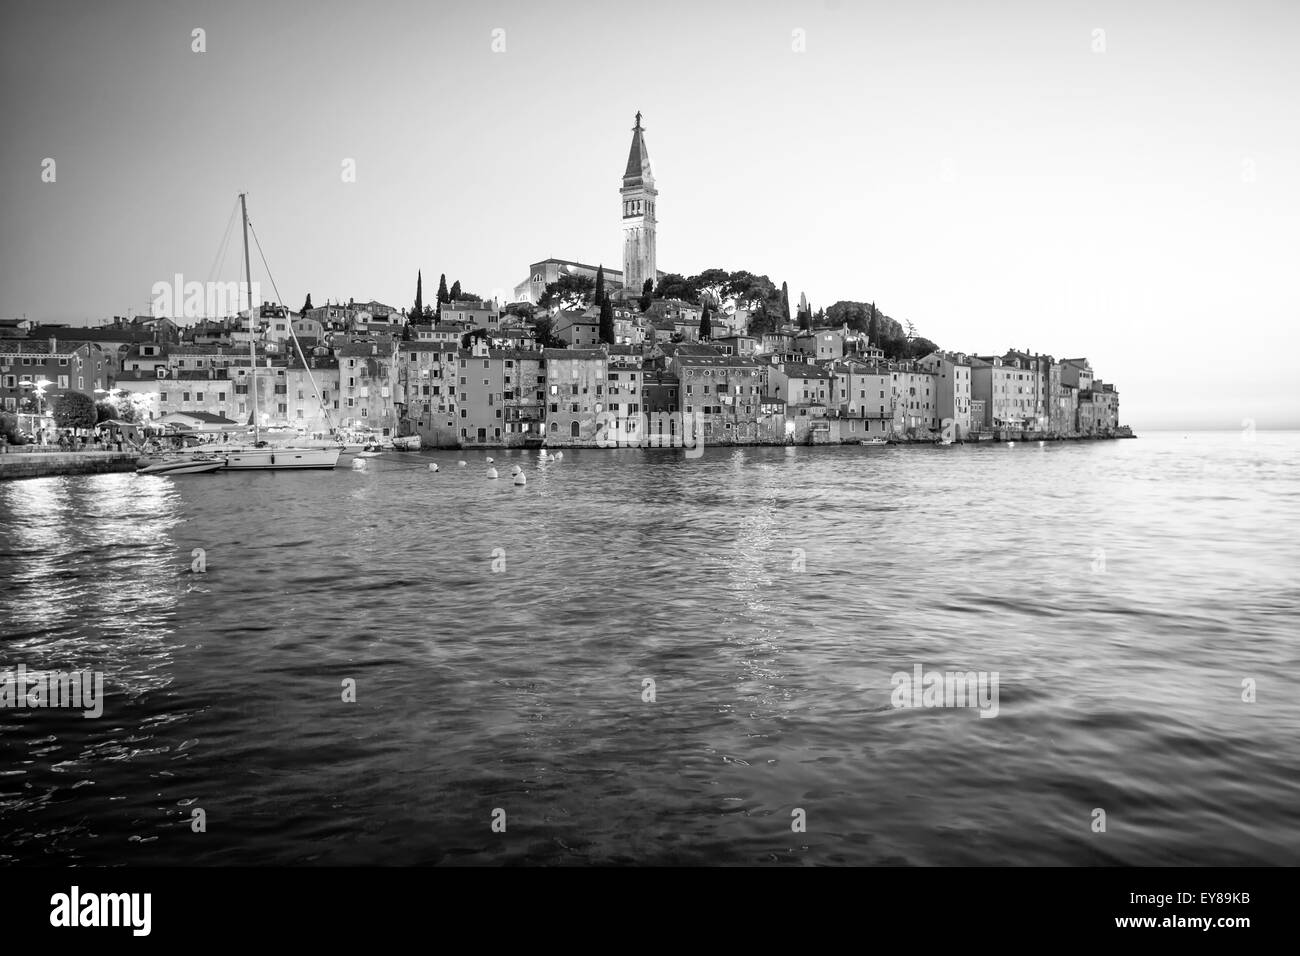 A view of the old city core with the Saint Euphemia church and bell tower at sunset in Rovinj, Croatia. Stock Photo